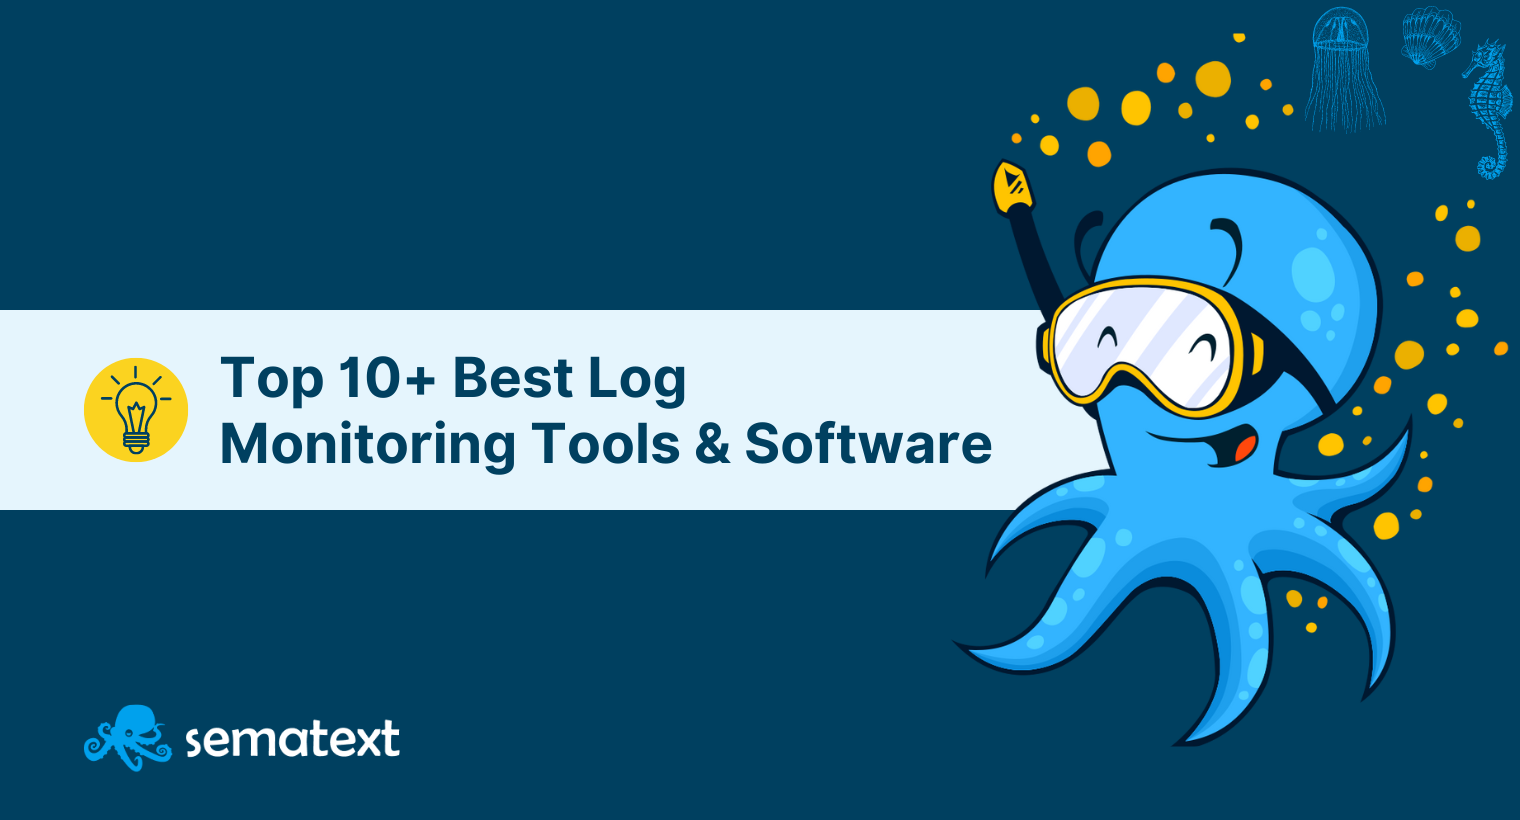 Top 10+ Best Log Monitoring Tools & Software: Free & Paid [2023 Comparison]